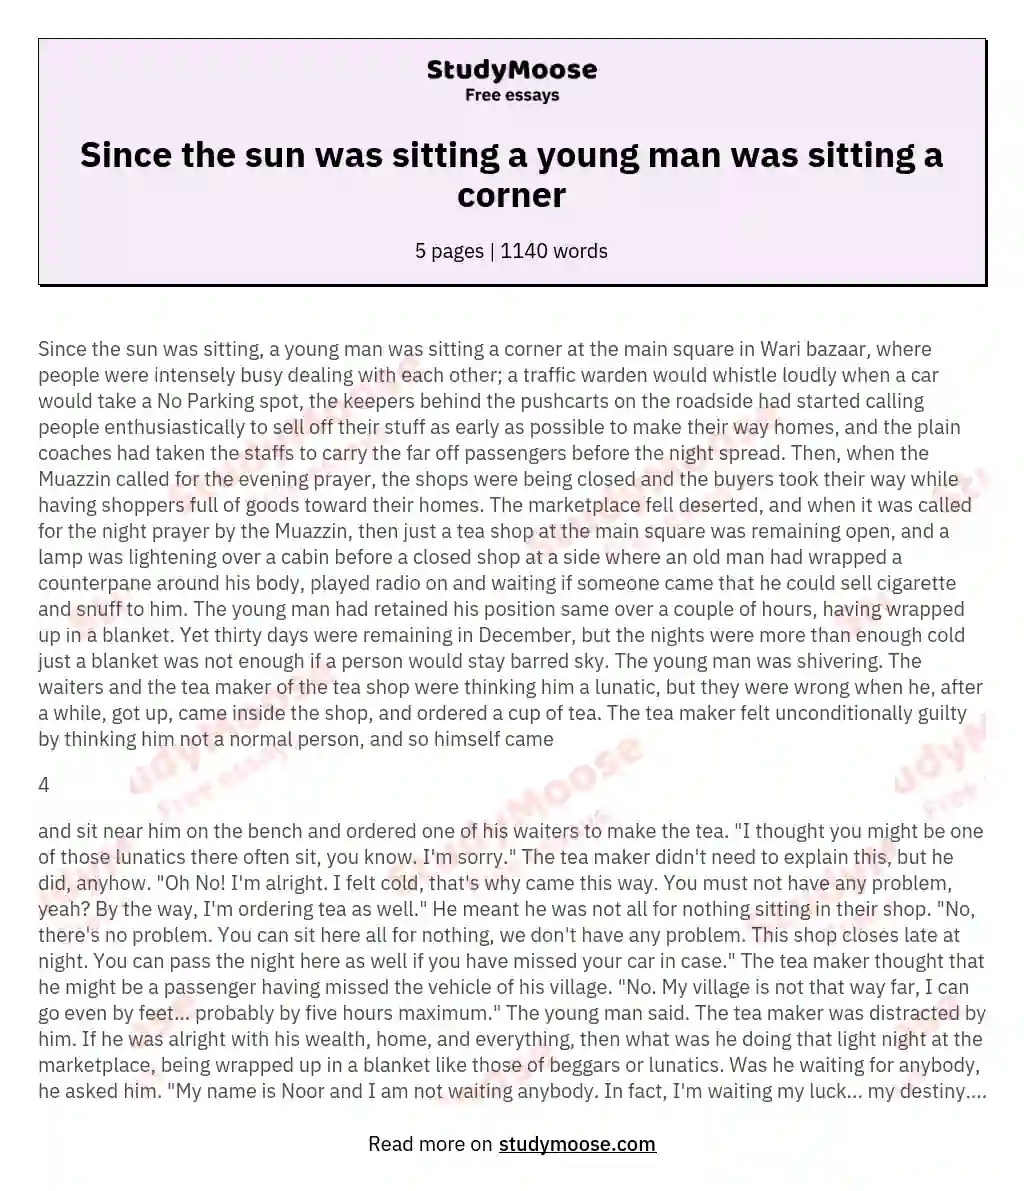 Since the sun was sitting a young man was sitting a corner essay